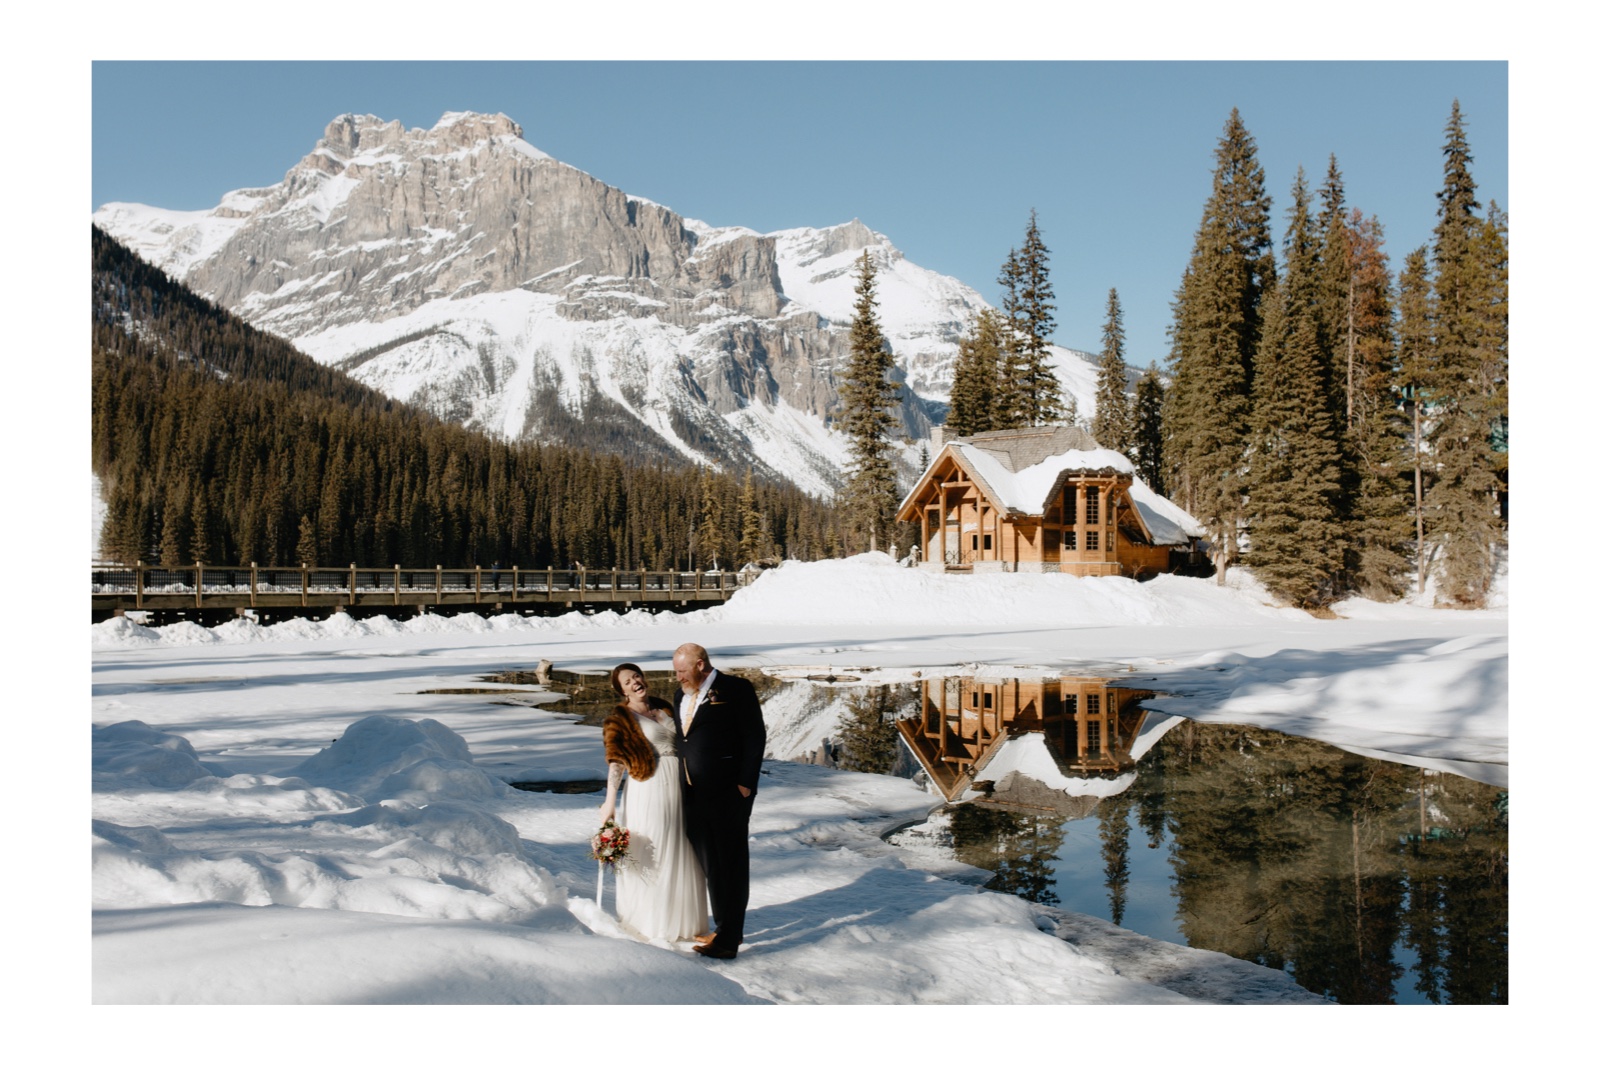 Wedding couple overlooking Cilantro at Emerald lake Lodge on a winter solstice day